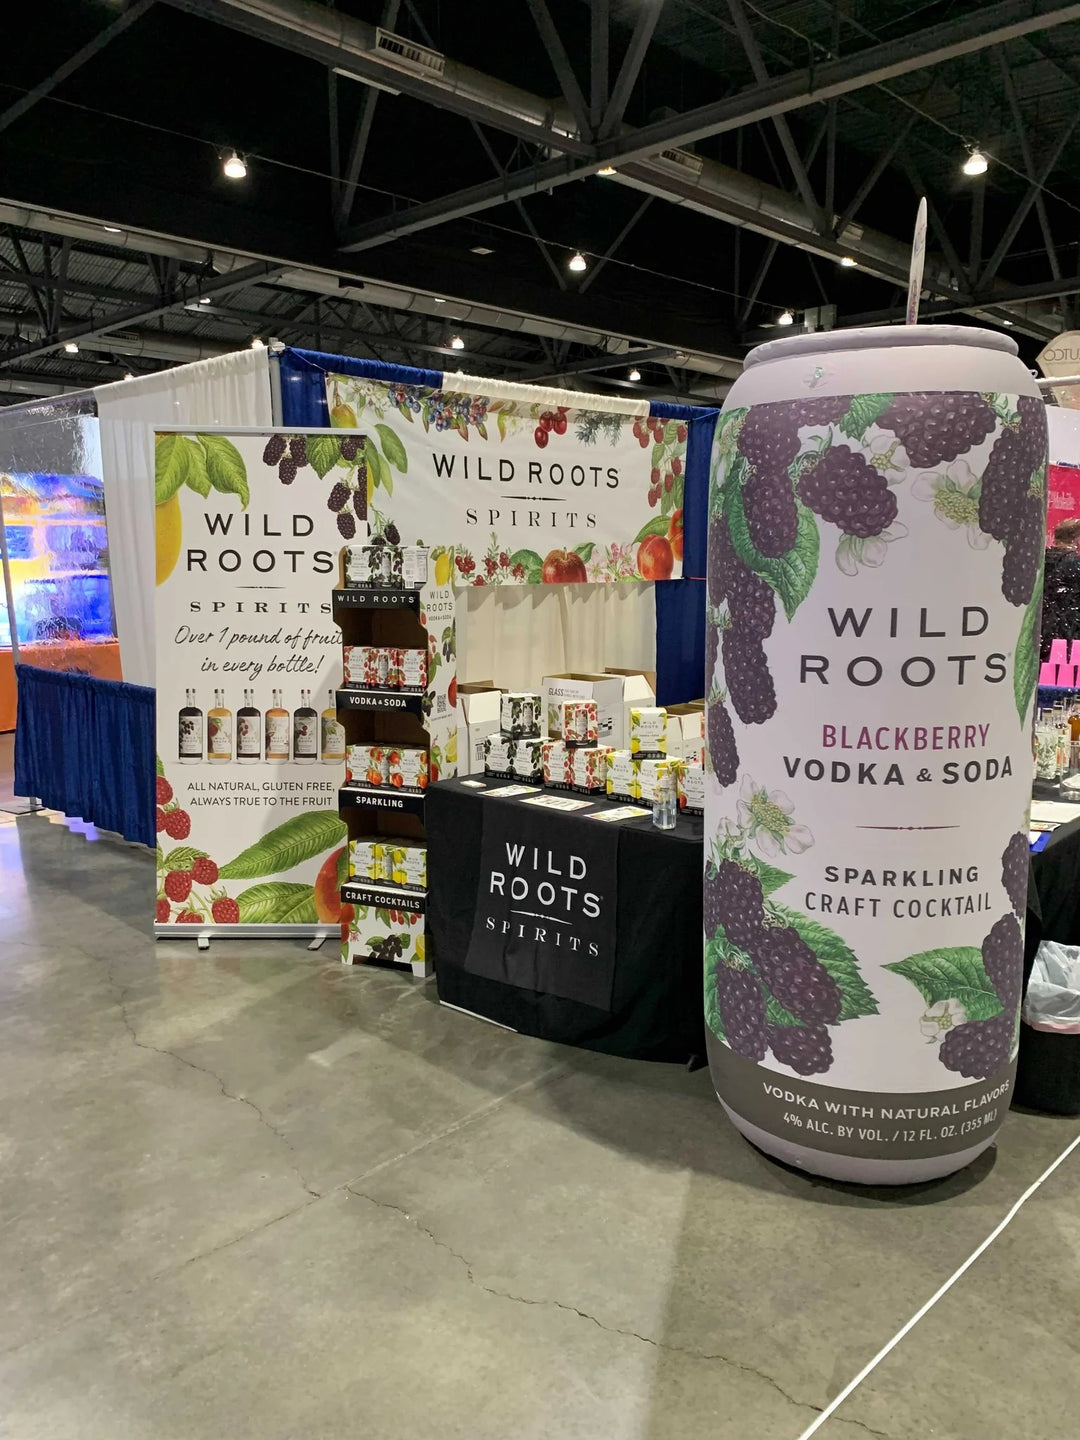 nflatable product replica of Wild Roots Blackberry Vodka & Soda at a 10 x 10 trade show booth